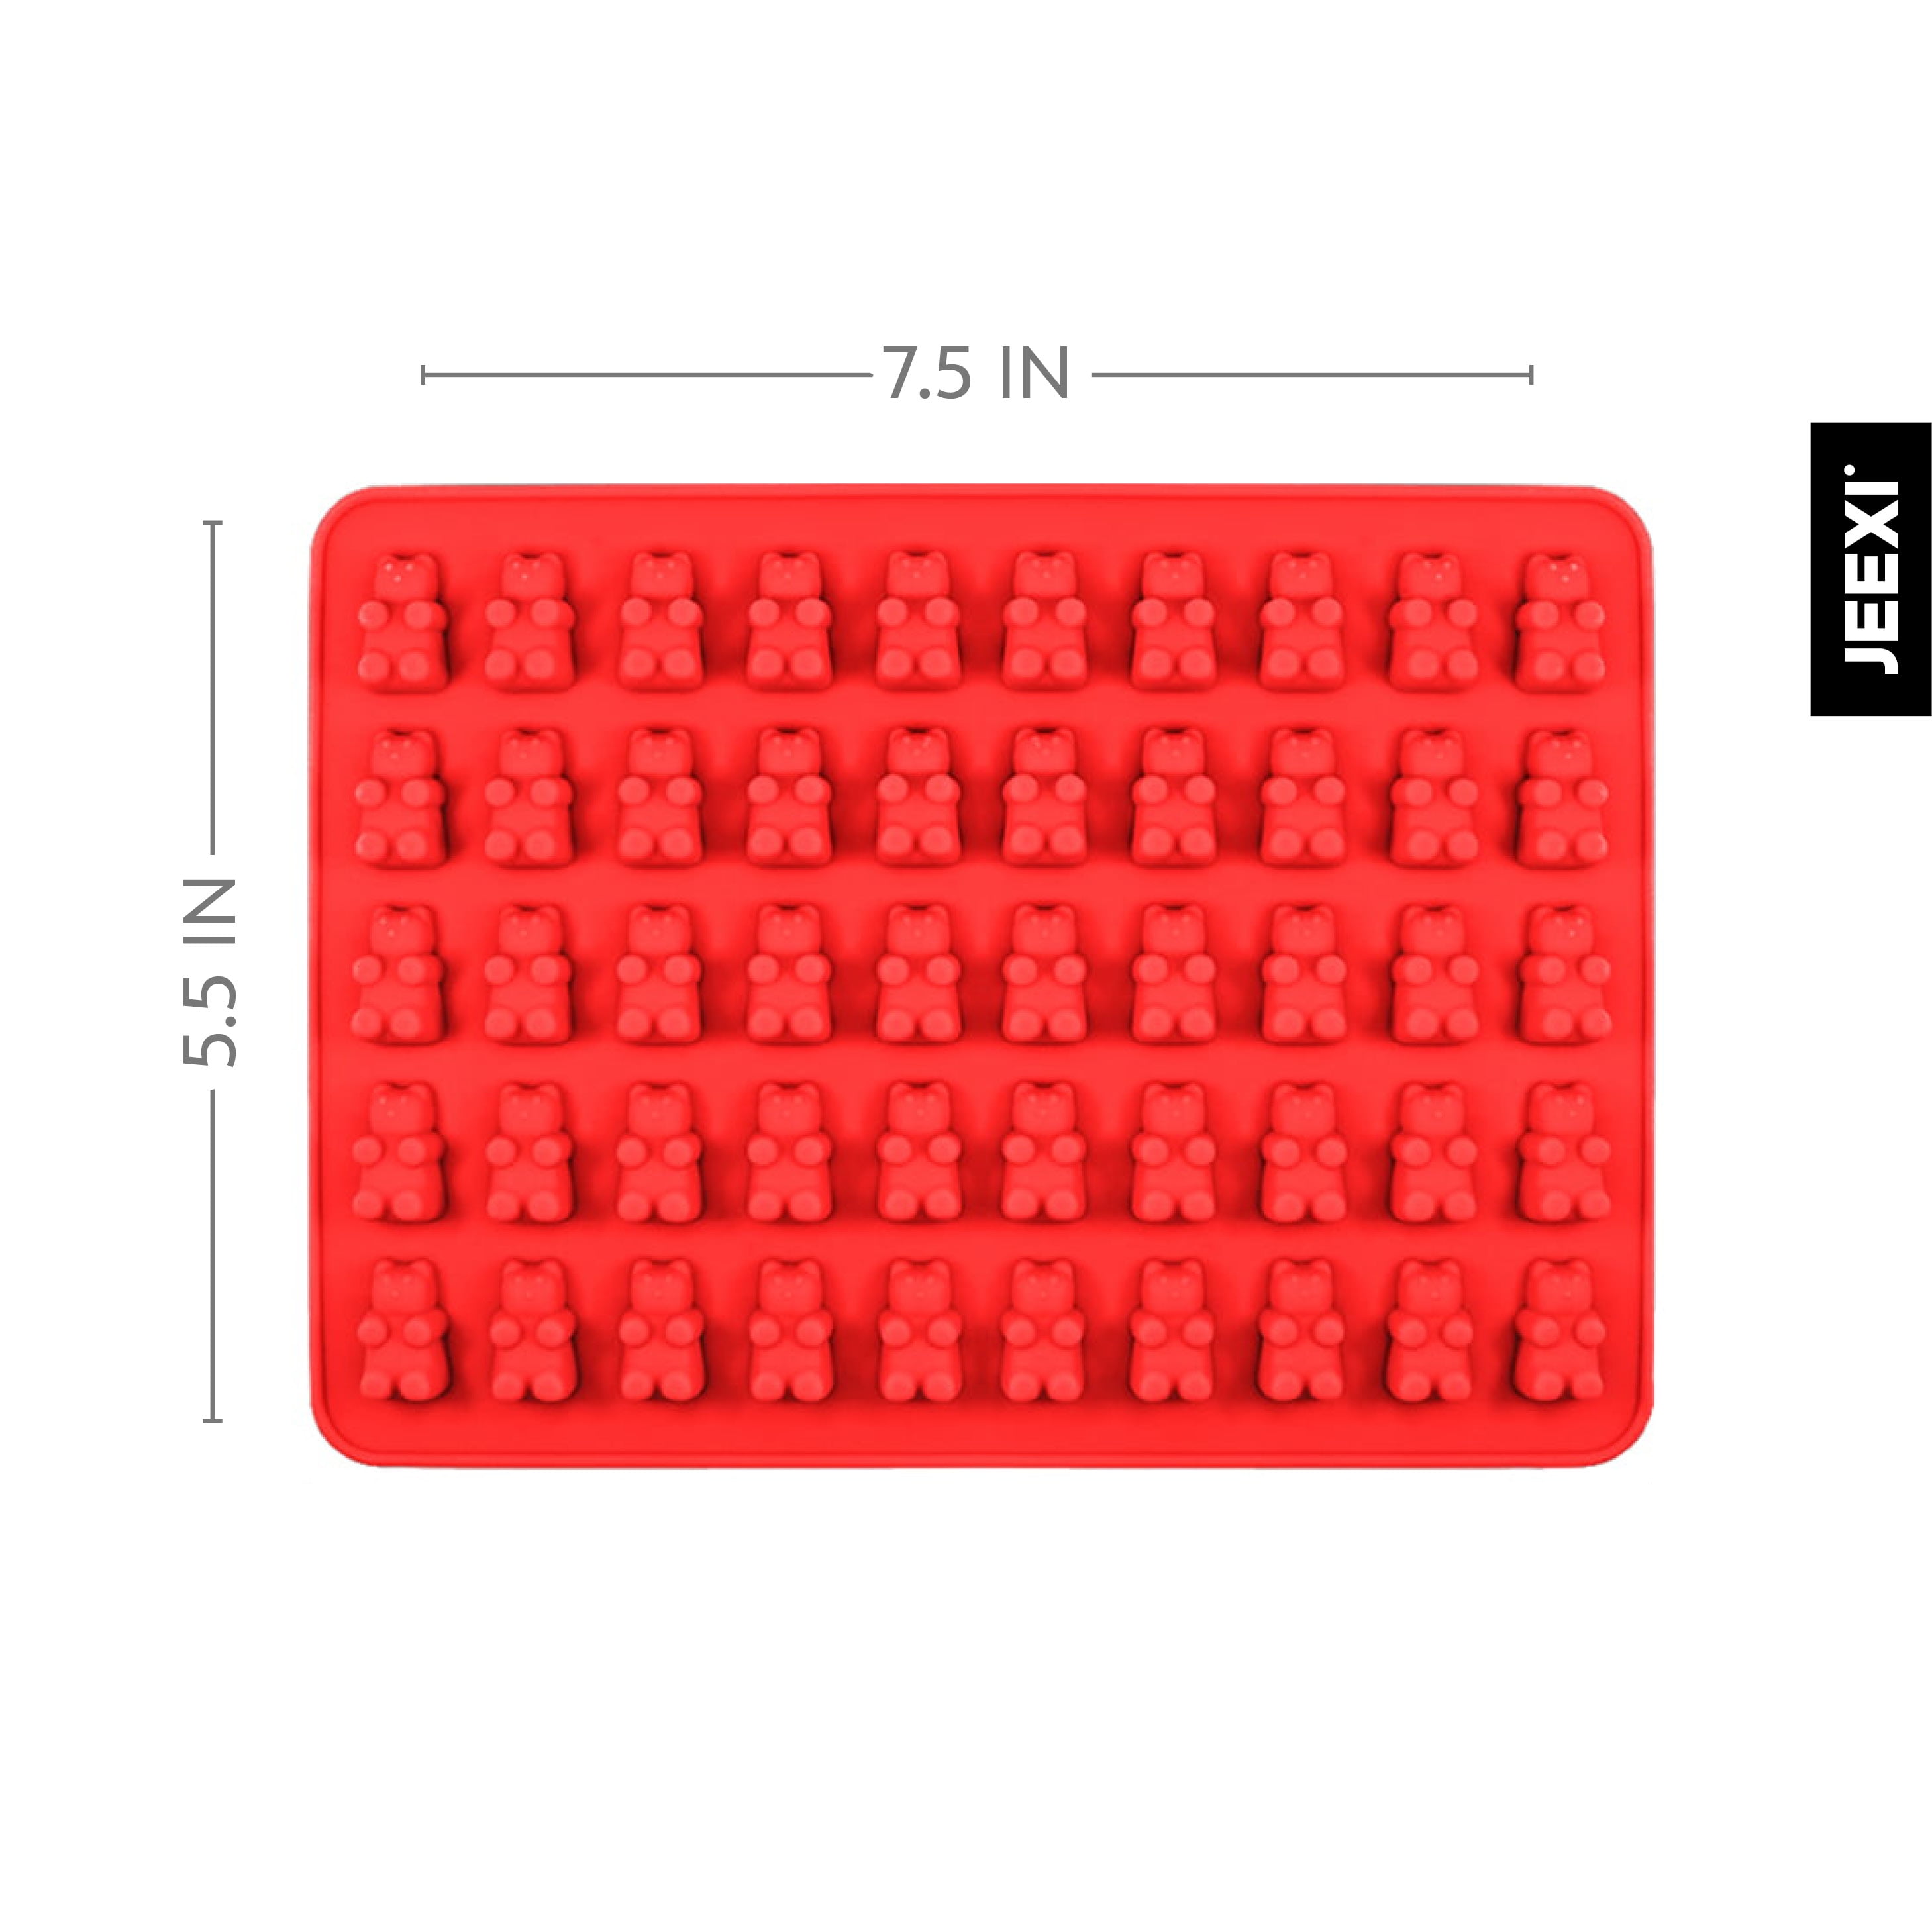 1 mL 1 cm Cube/Square Gummy Mold - Full Sheet Silicone Mold - 1781 Cavities